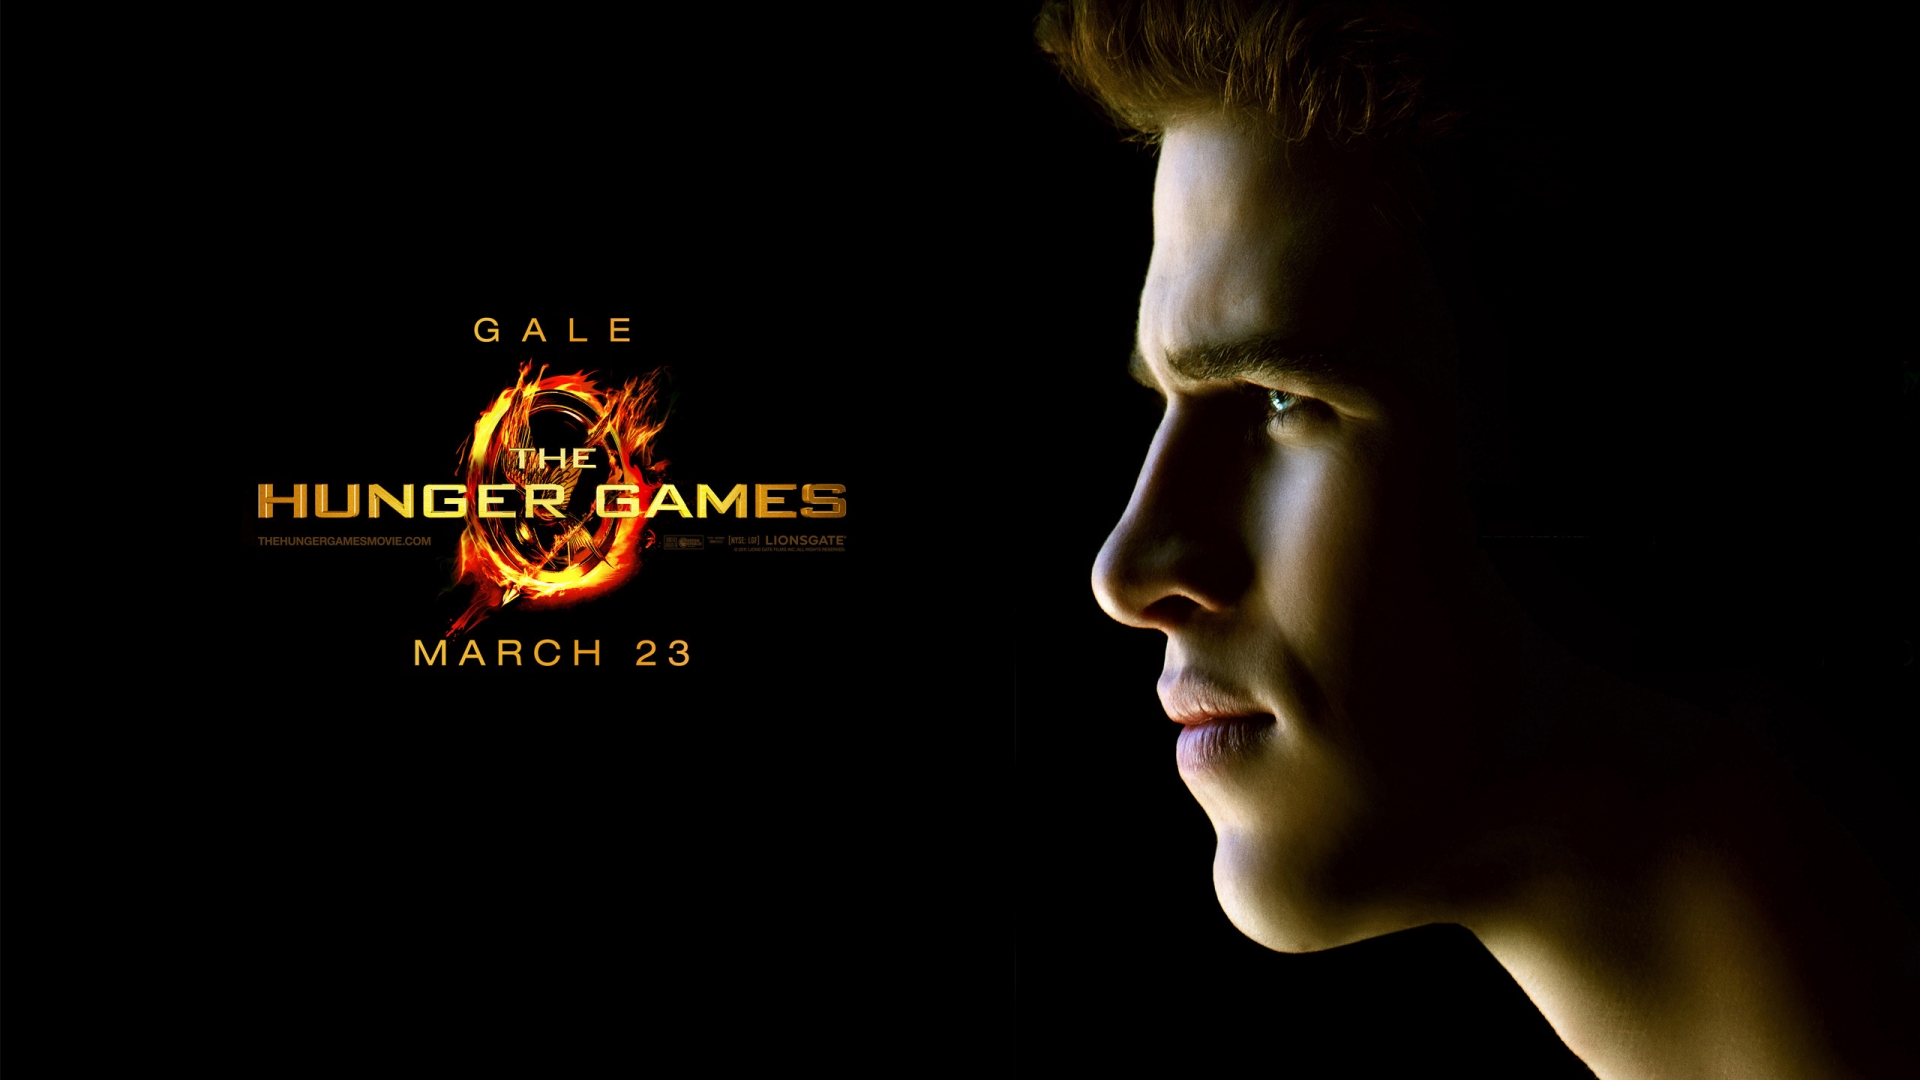 The Hunger Games Gale for 1920 x 1080 HDTV 1080p resolution